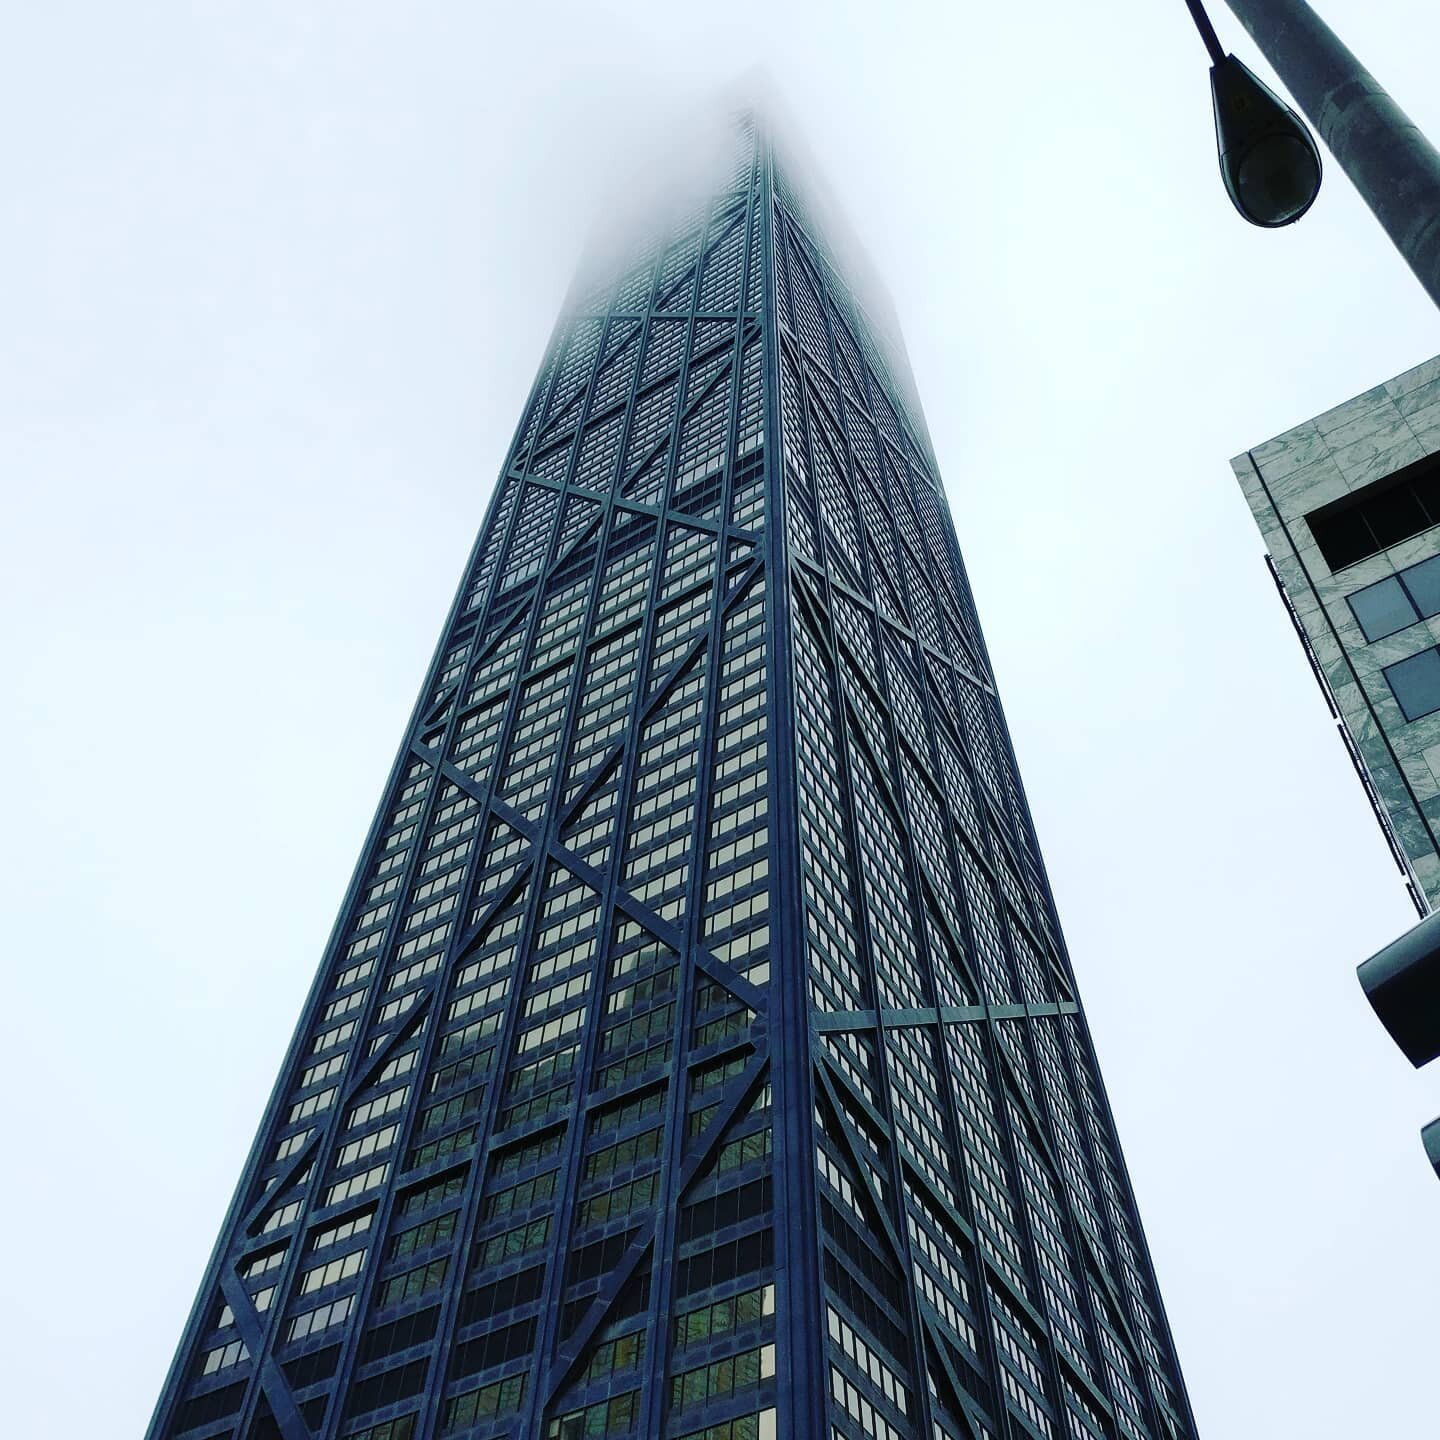 Formerly called the #johnhancockcenter, the #skyscraper at 875 North Michigan Ave in #chicago is a 100-storey steel #icon. The building is 457m (1500ft) at its highest point. Construction started in 1965. Construction was stopped in 1967 when the tow